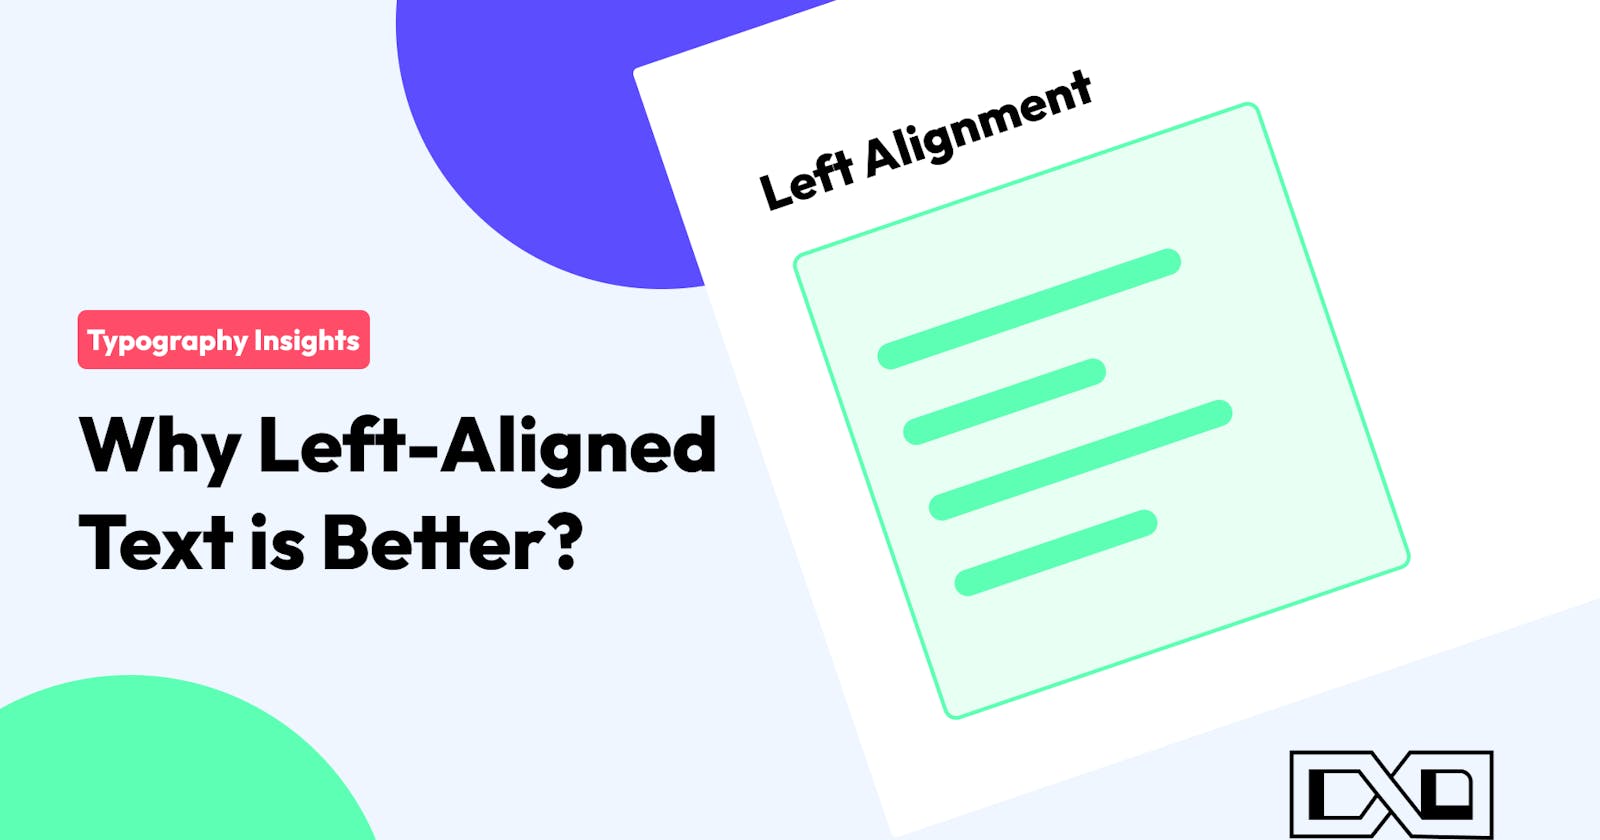 Typography Insights: Why Left-Aligned Text is Better